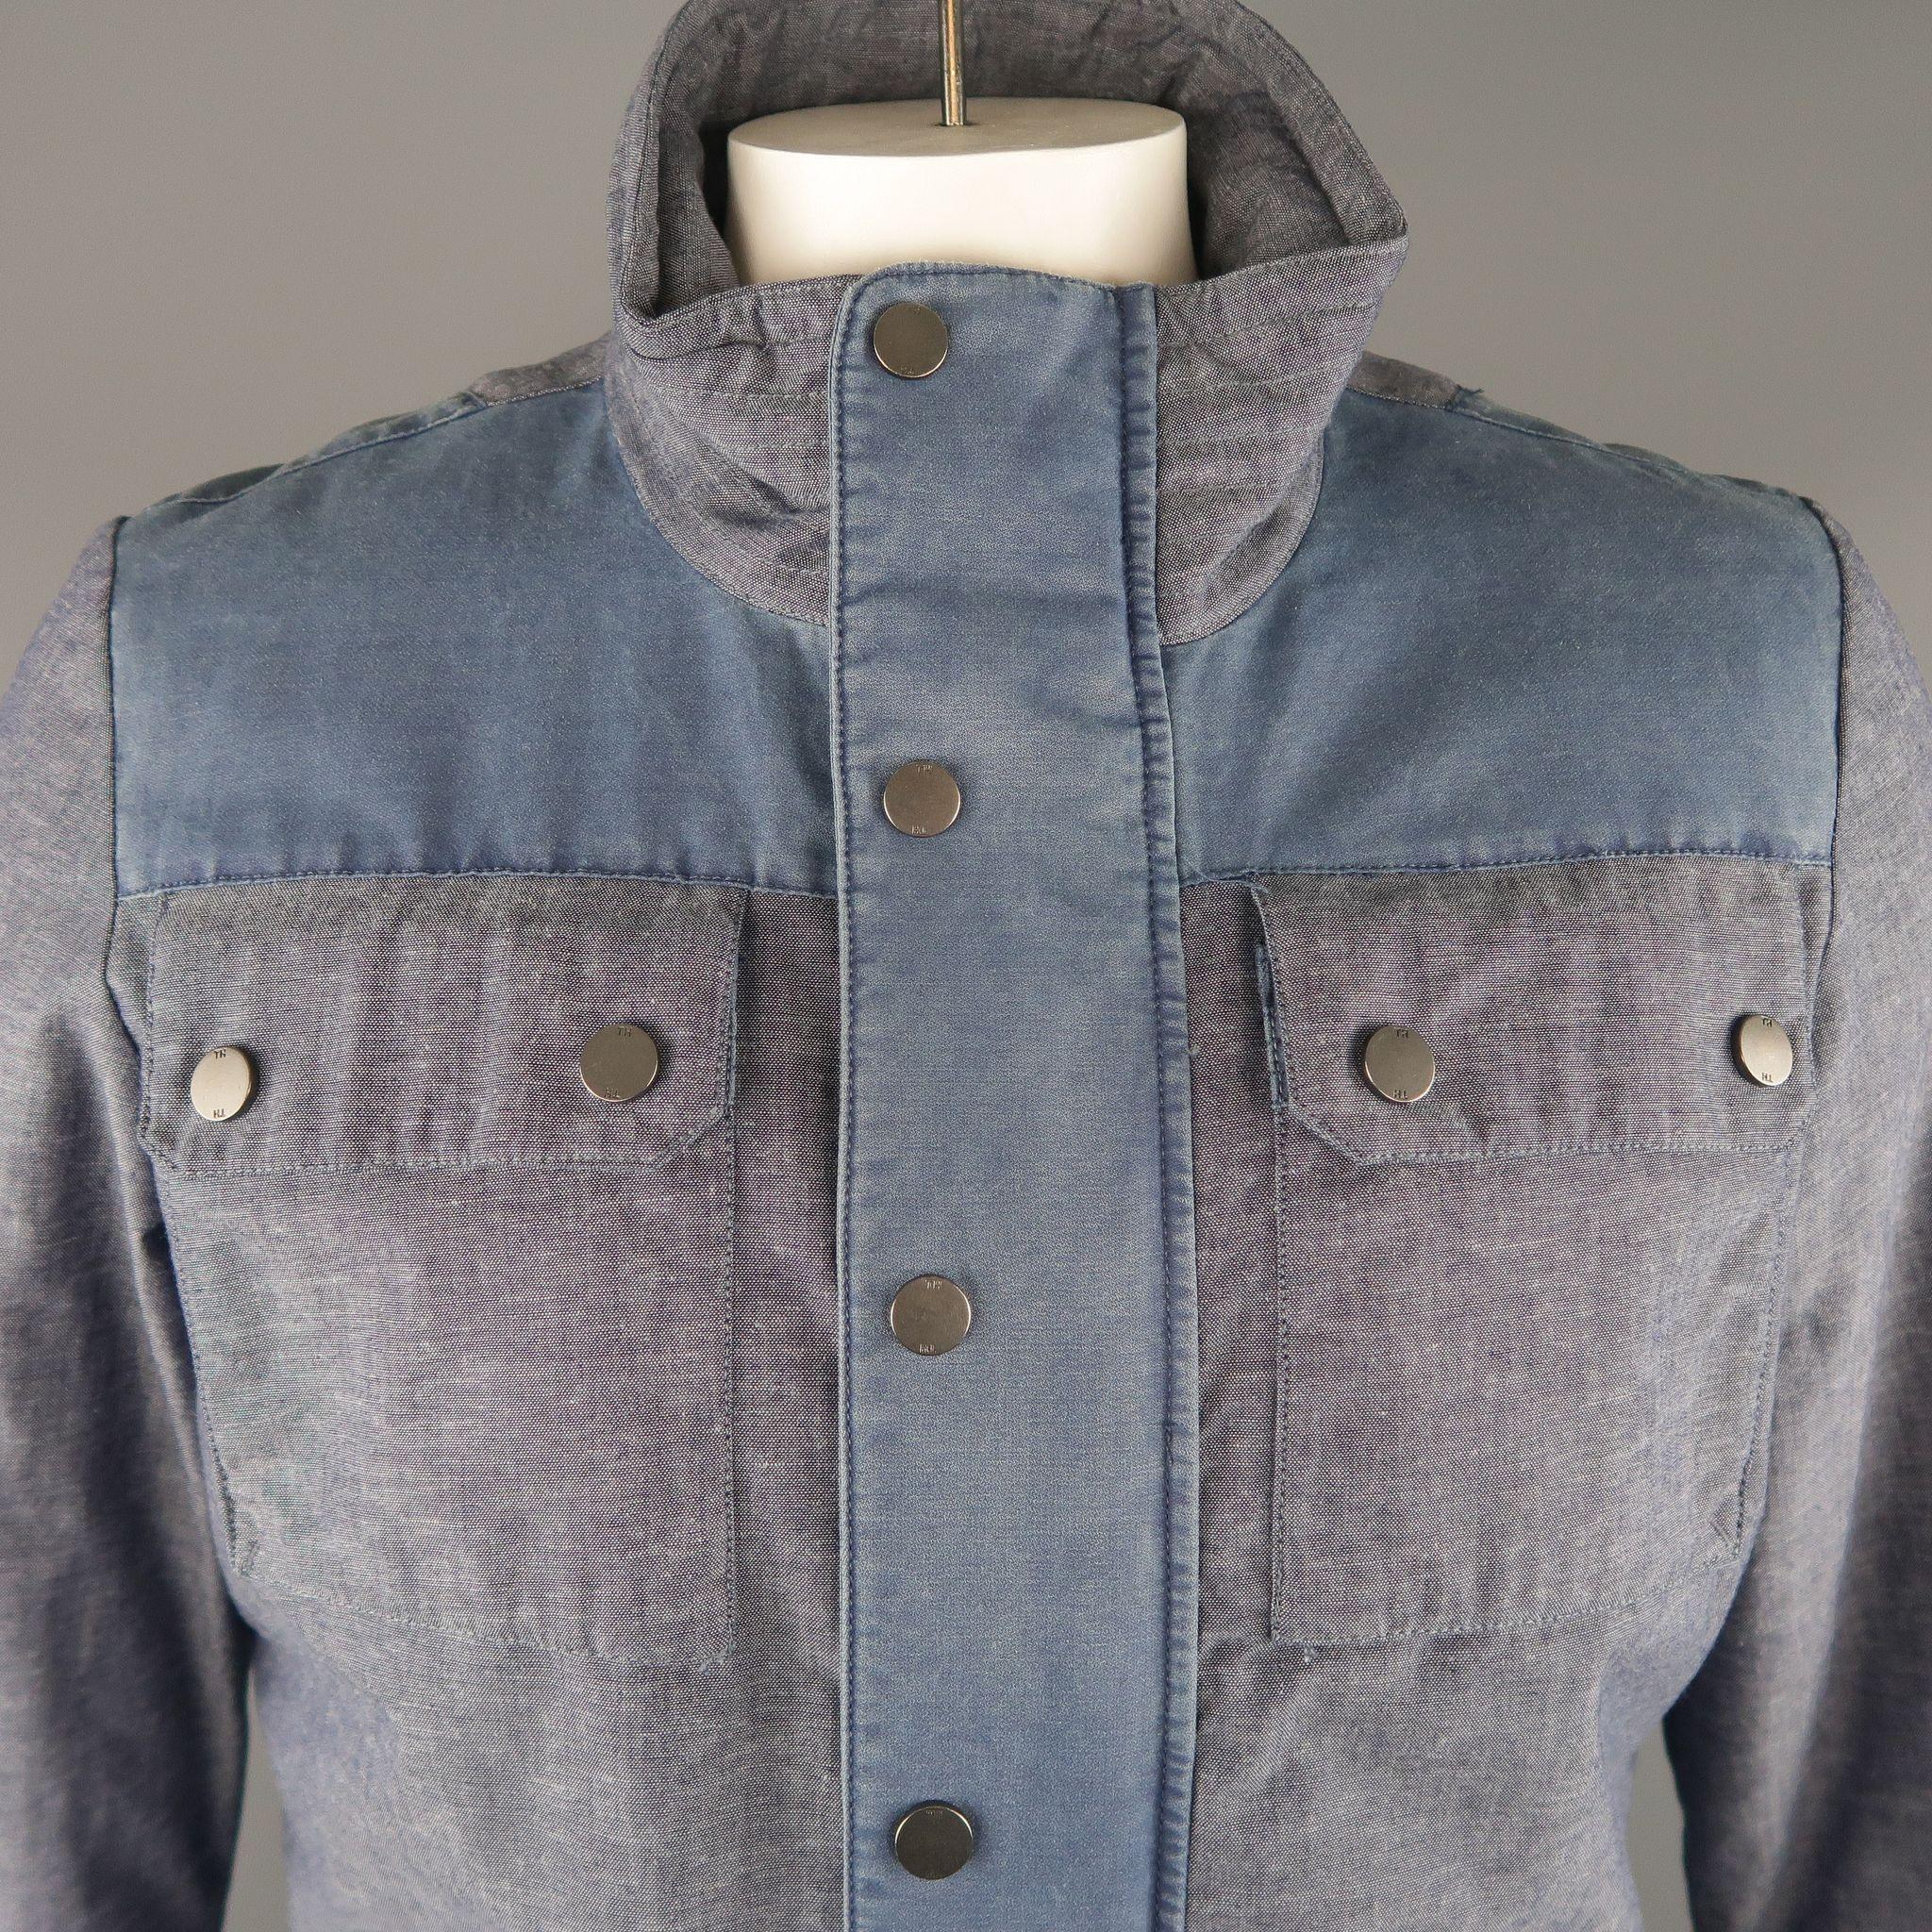 TOMMY HILFIGER jacket comes in blue tones in solid cotton / linen  material, with a high collar, patch and cargo pockets, zips and snaps.
 
Excellent Pre-Owned Condition.
Marked: M
 
Measurements:
 
Shoulder: 17.5  in.
Chest: 48  in.
Sleeve: 27 